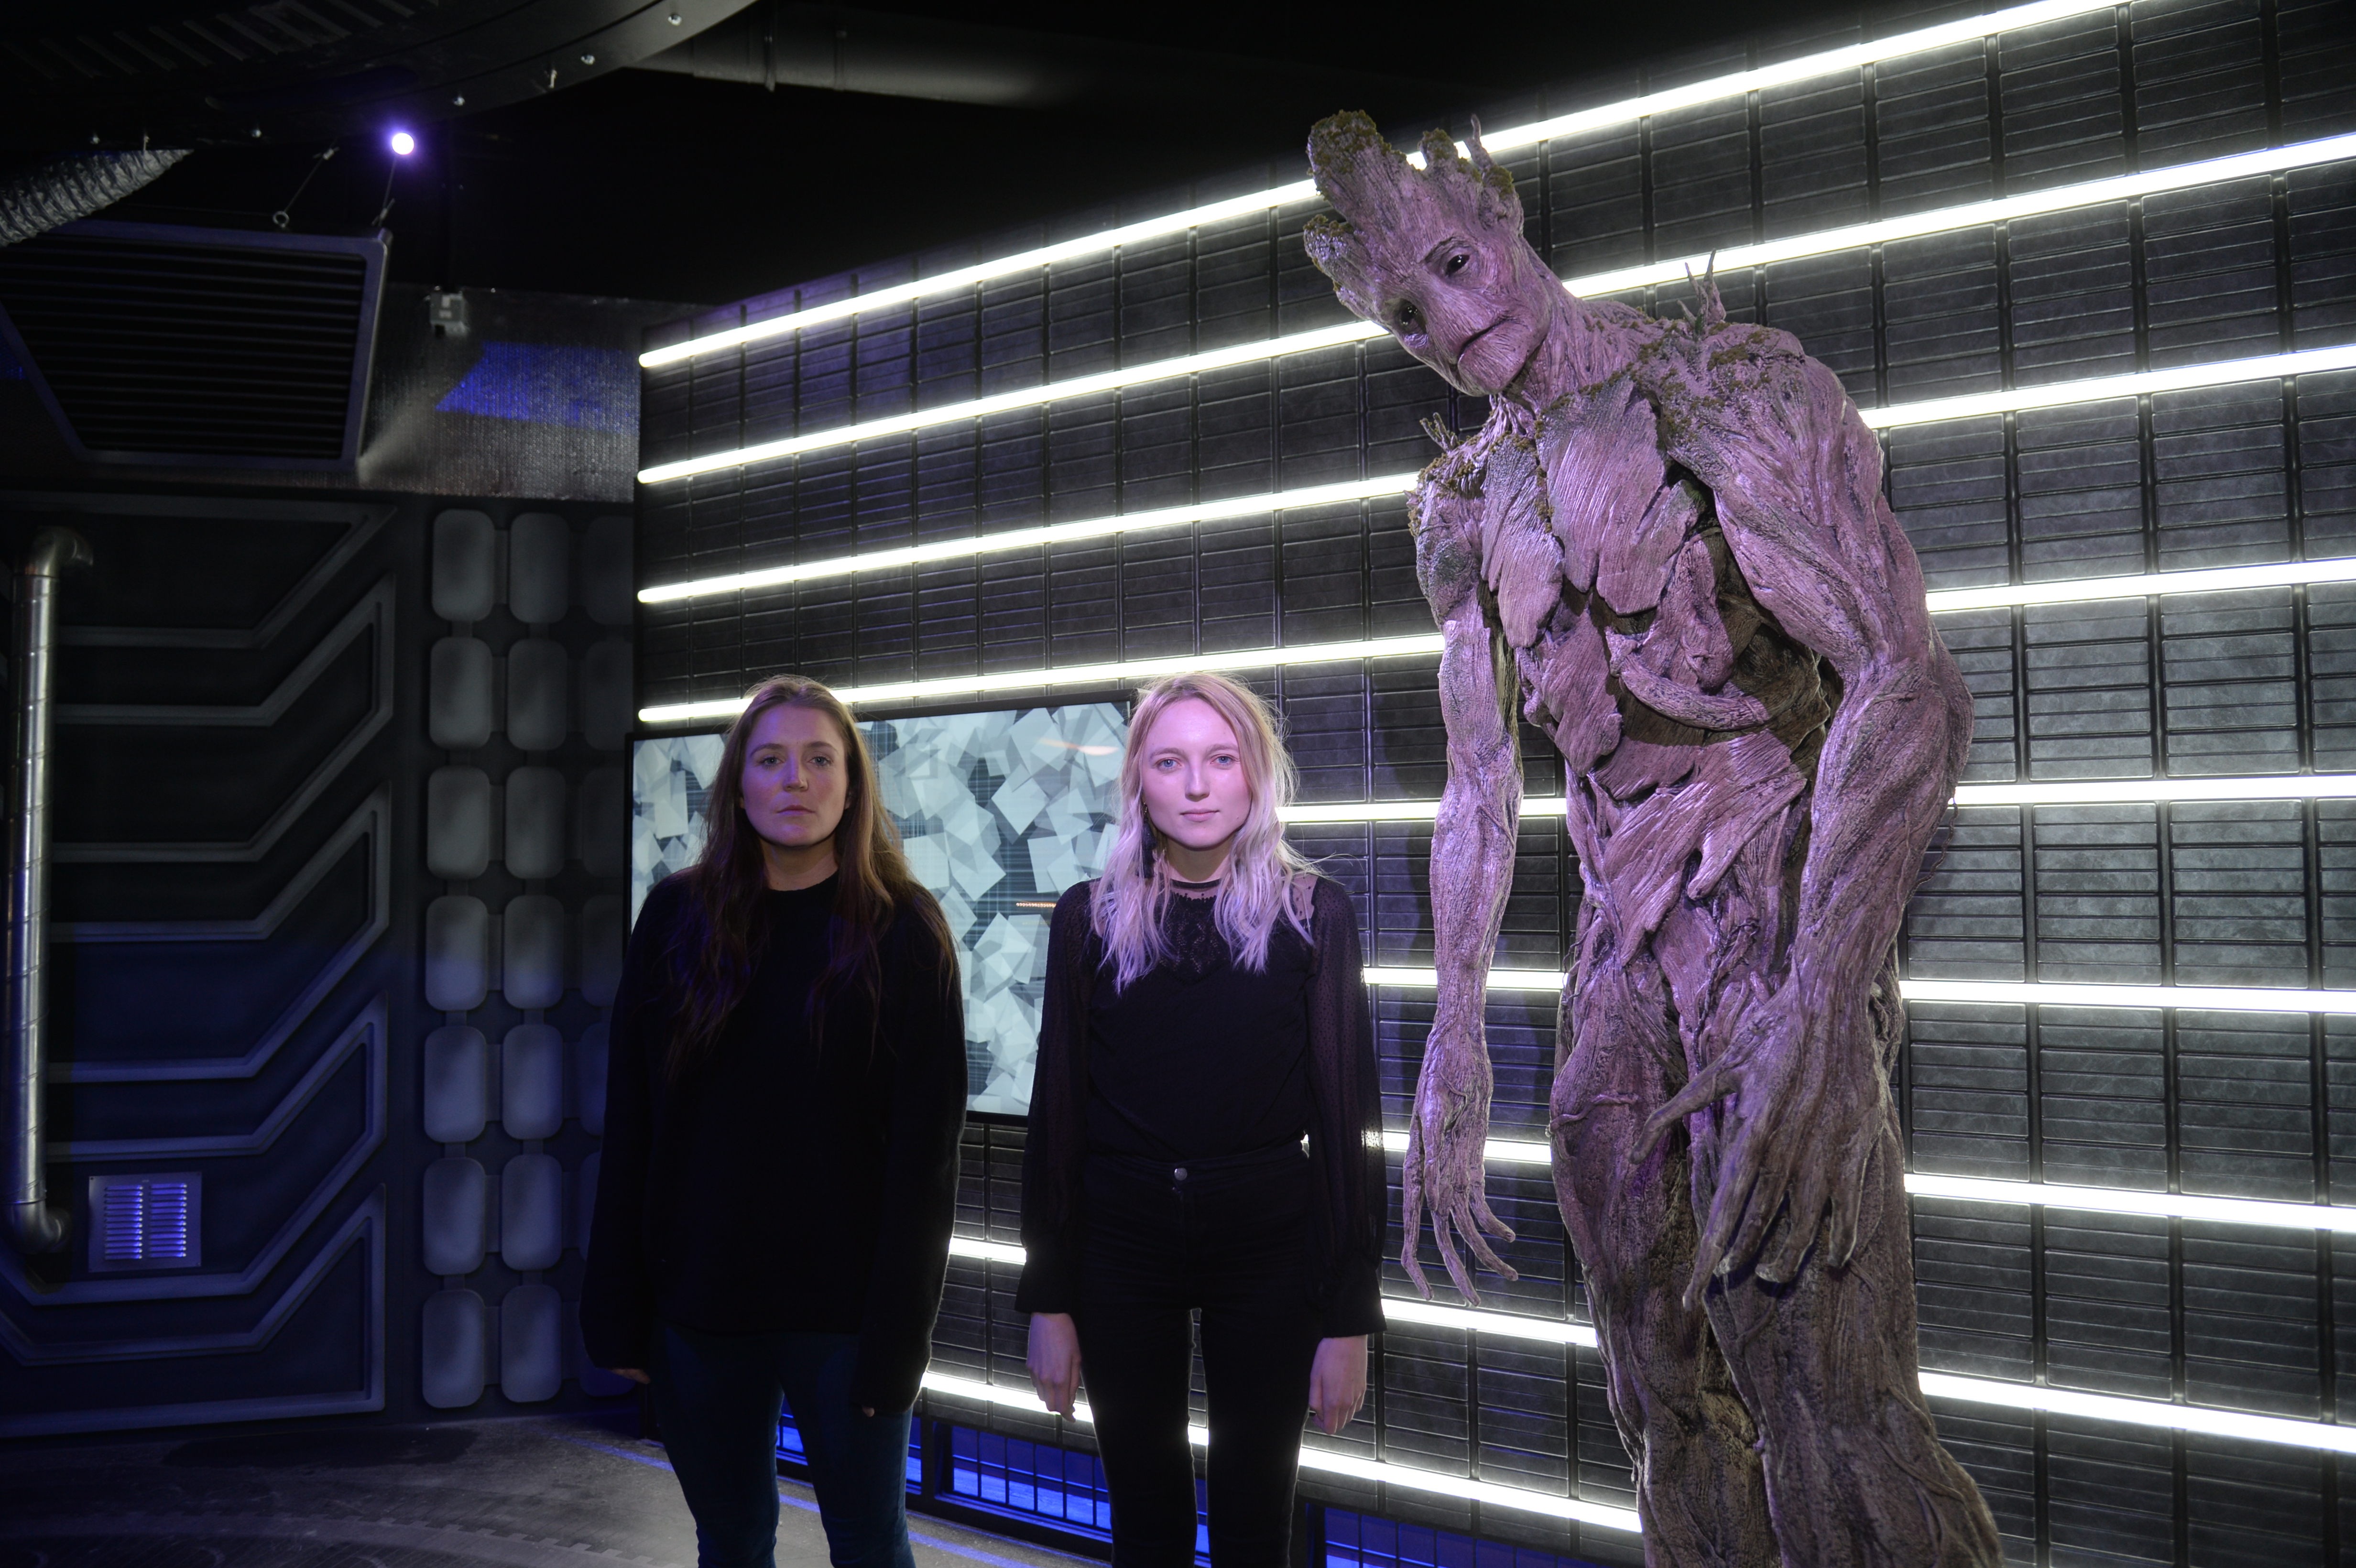 Groot from Guardians of the Galaxy figure at Madame Tussauds Blackpool